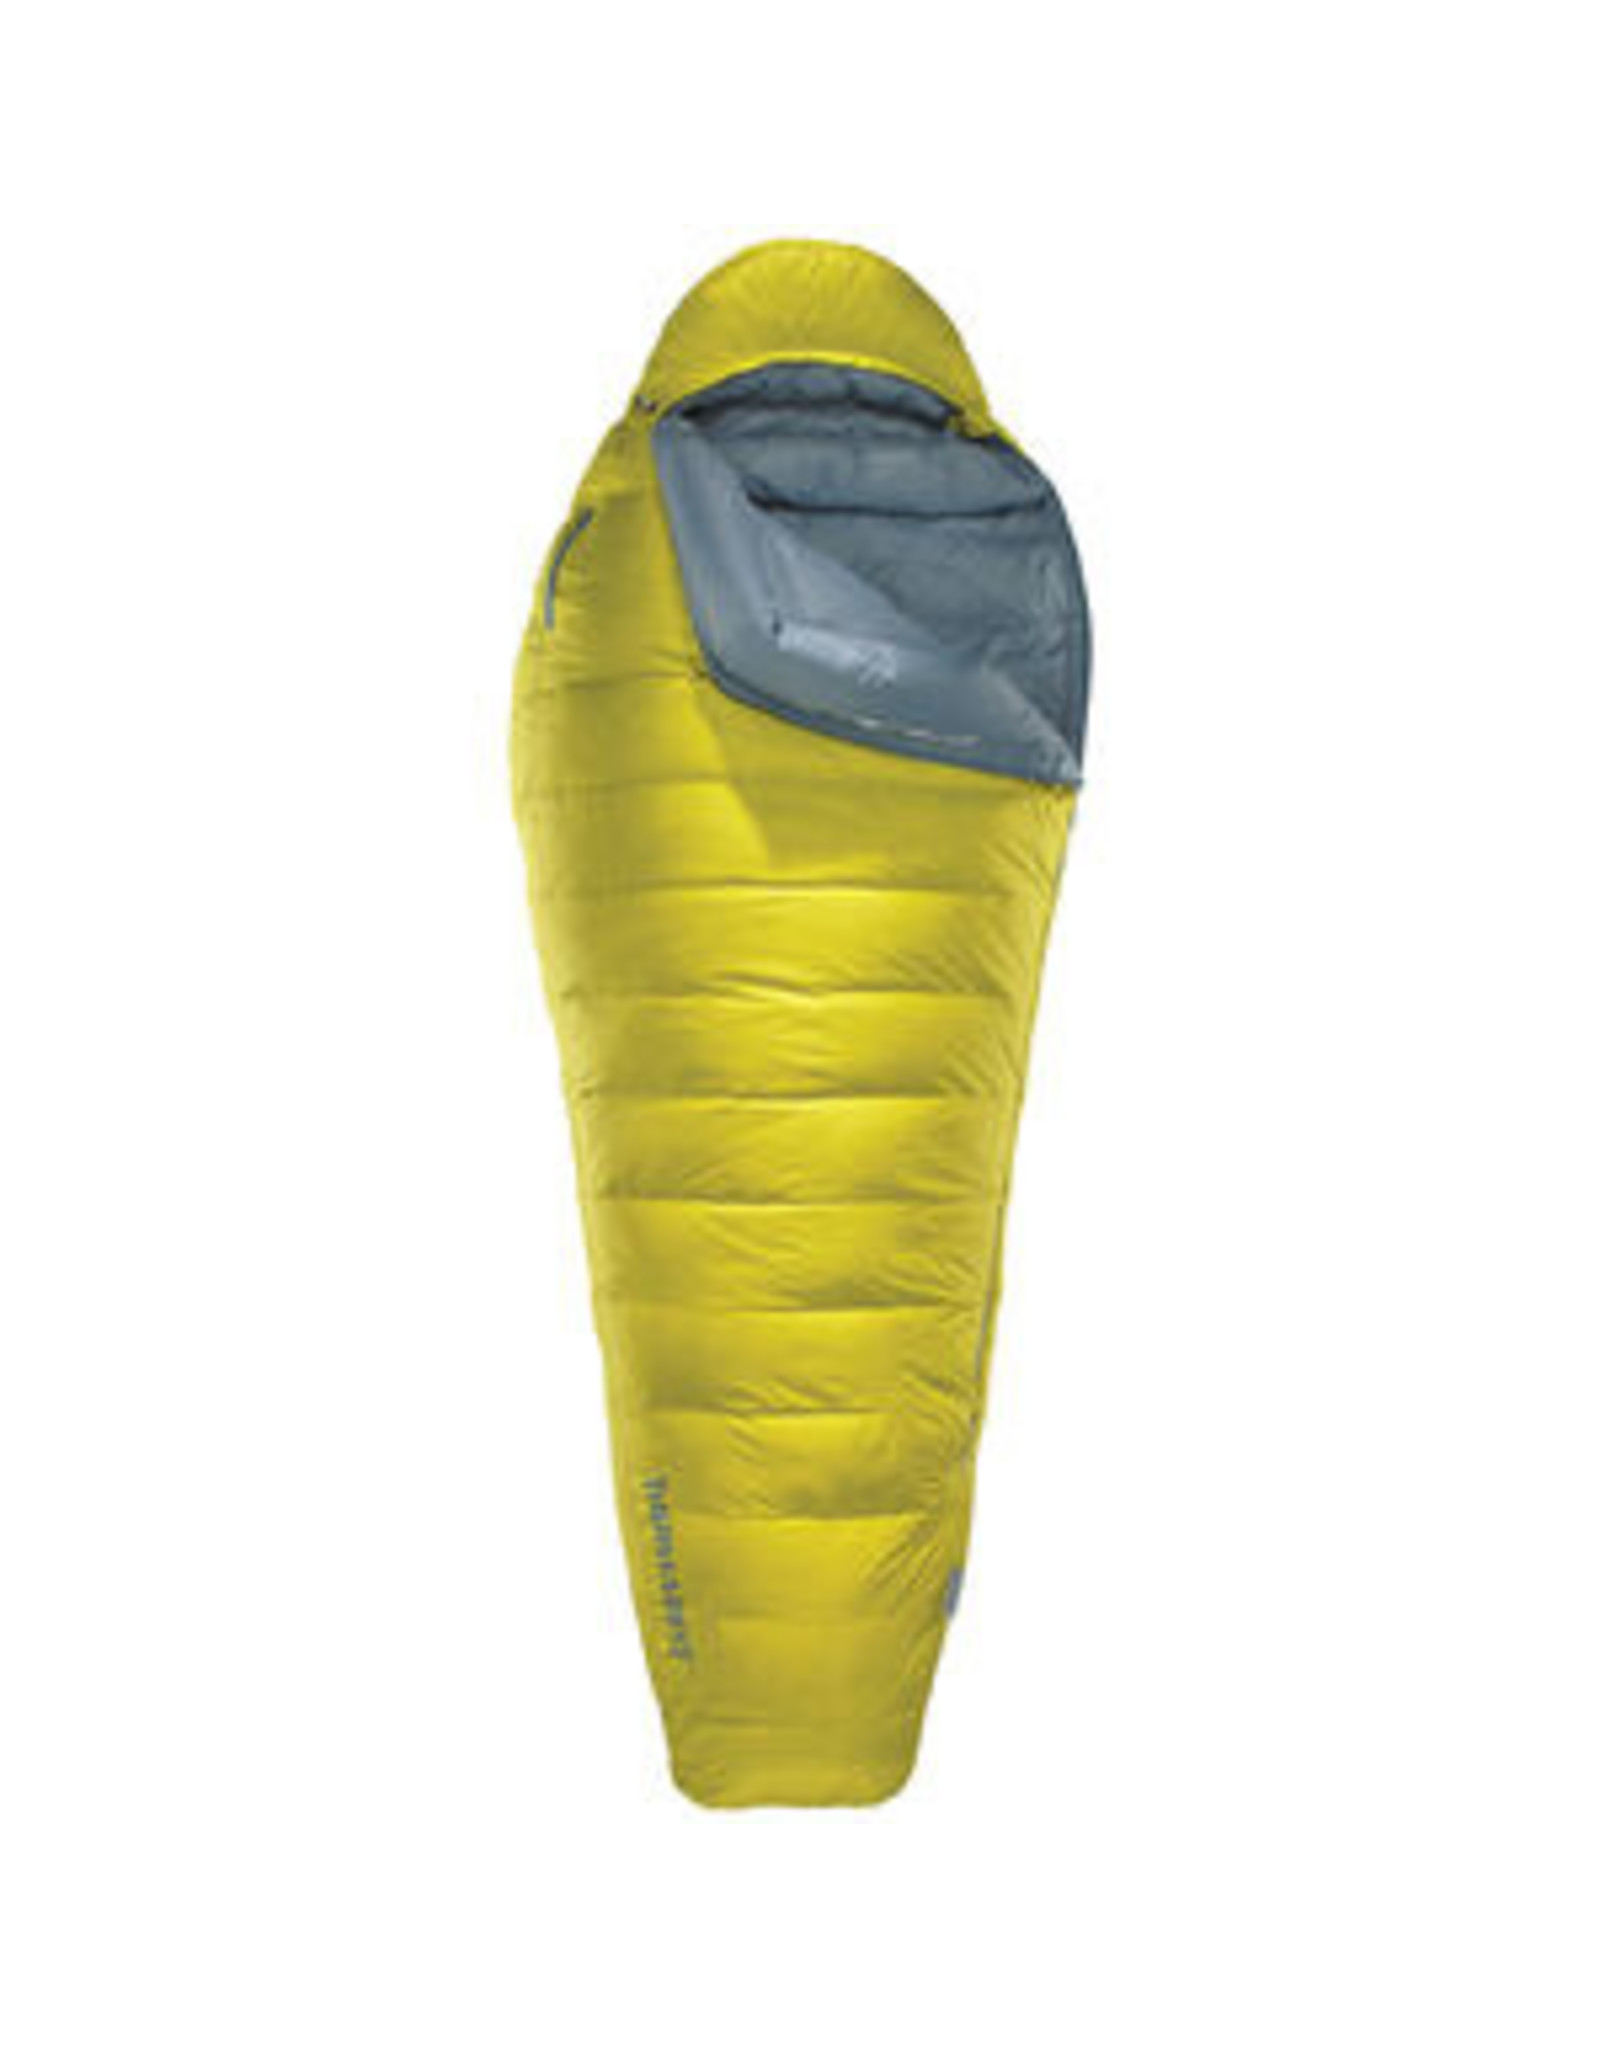 Therm-a-Rest PARSEC 20 DOWN SLEEPING BAG -6C